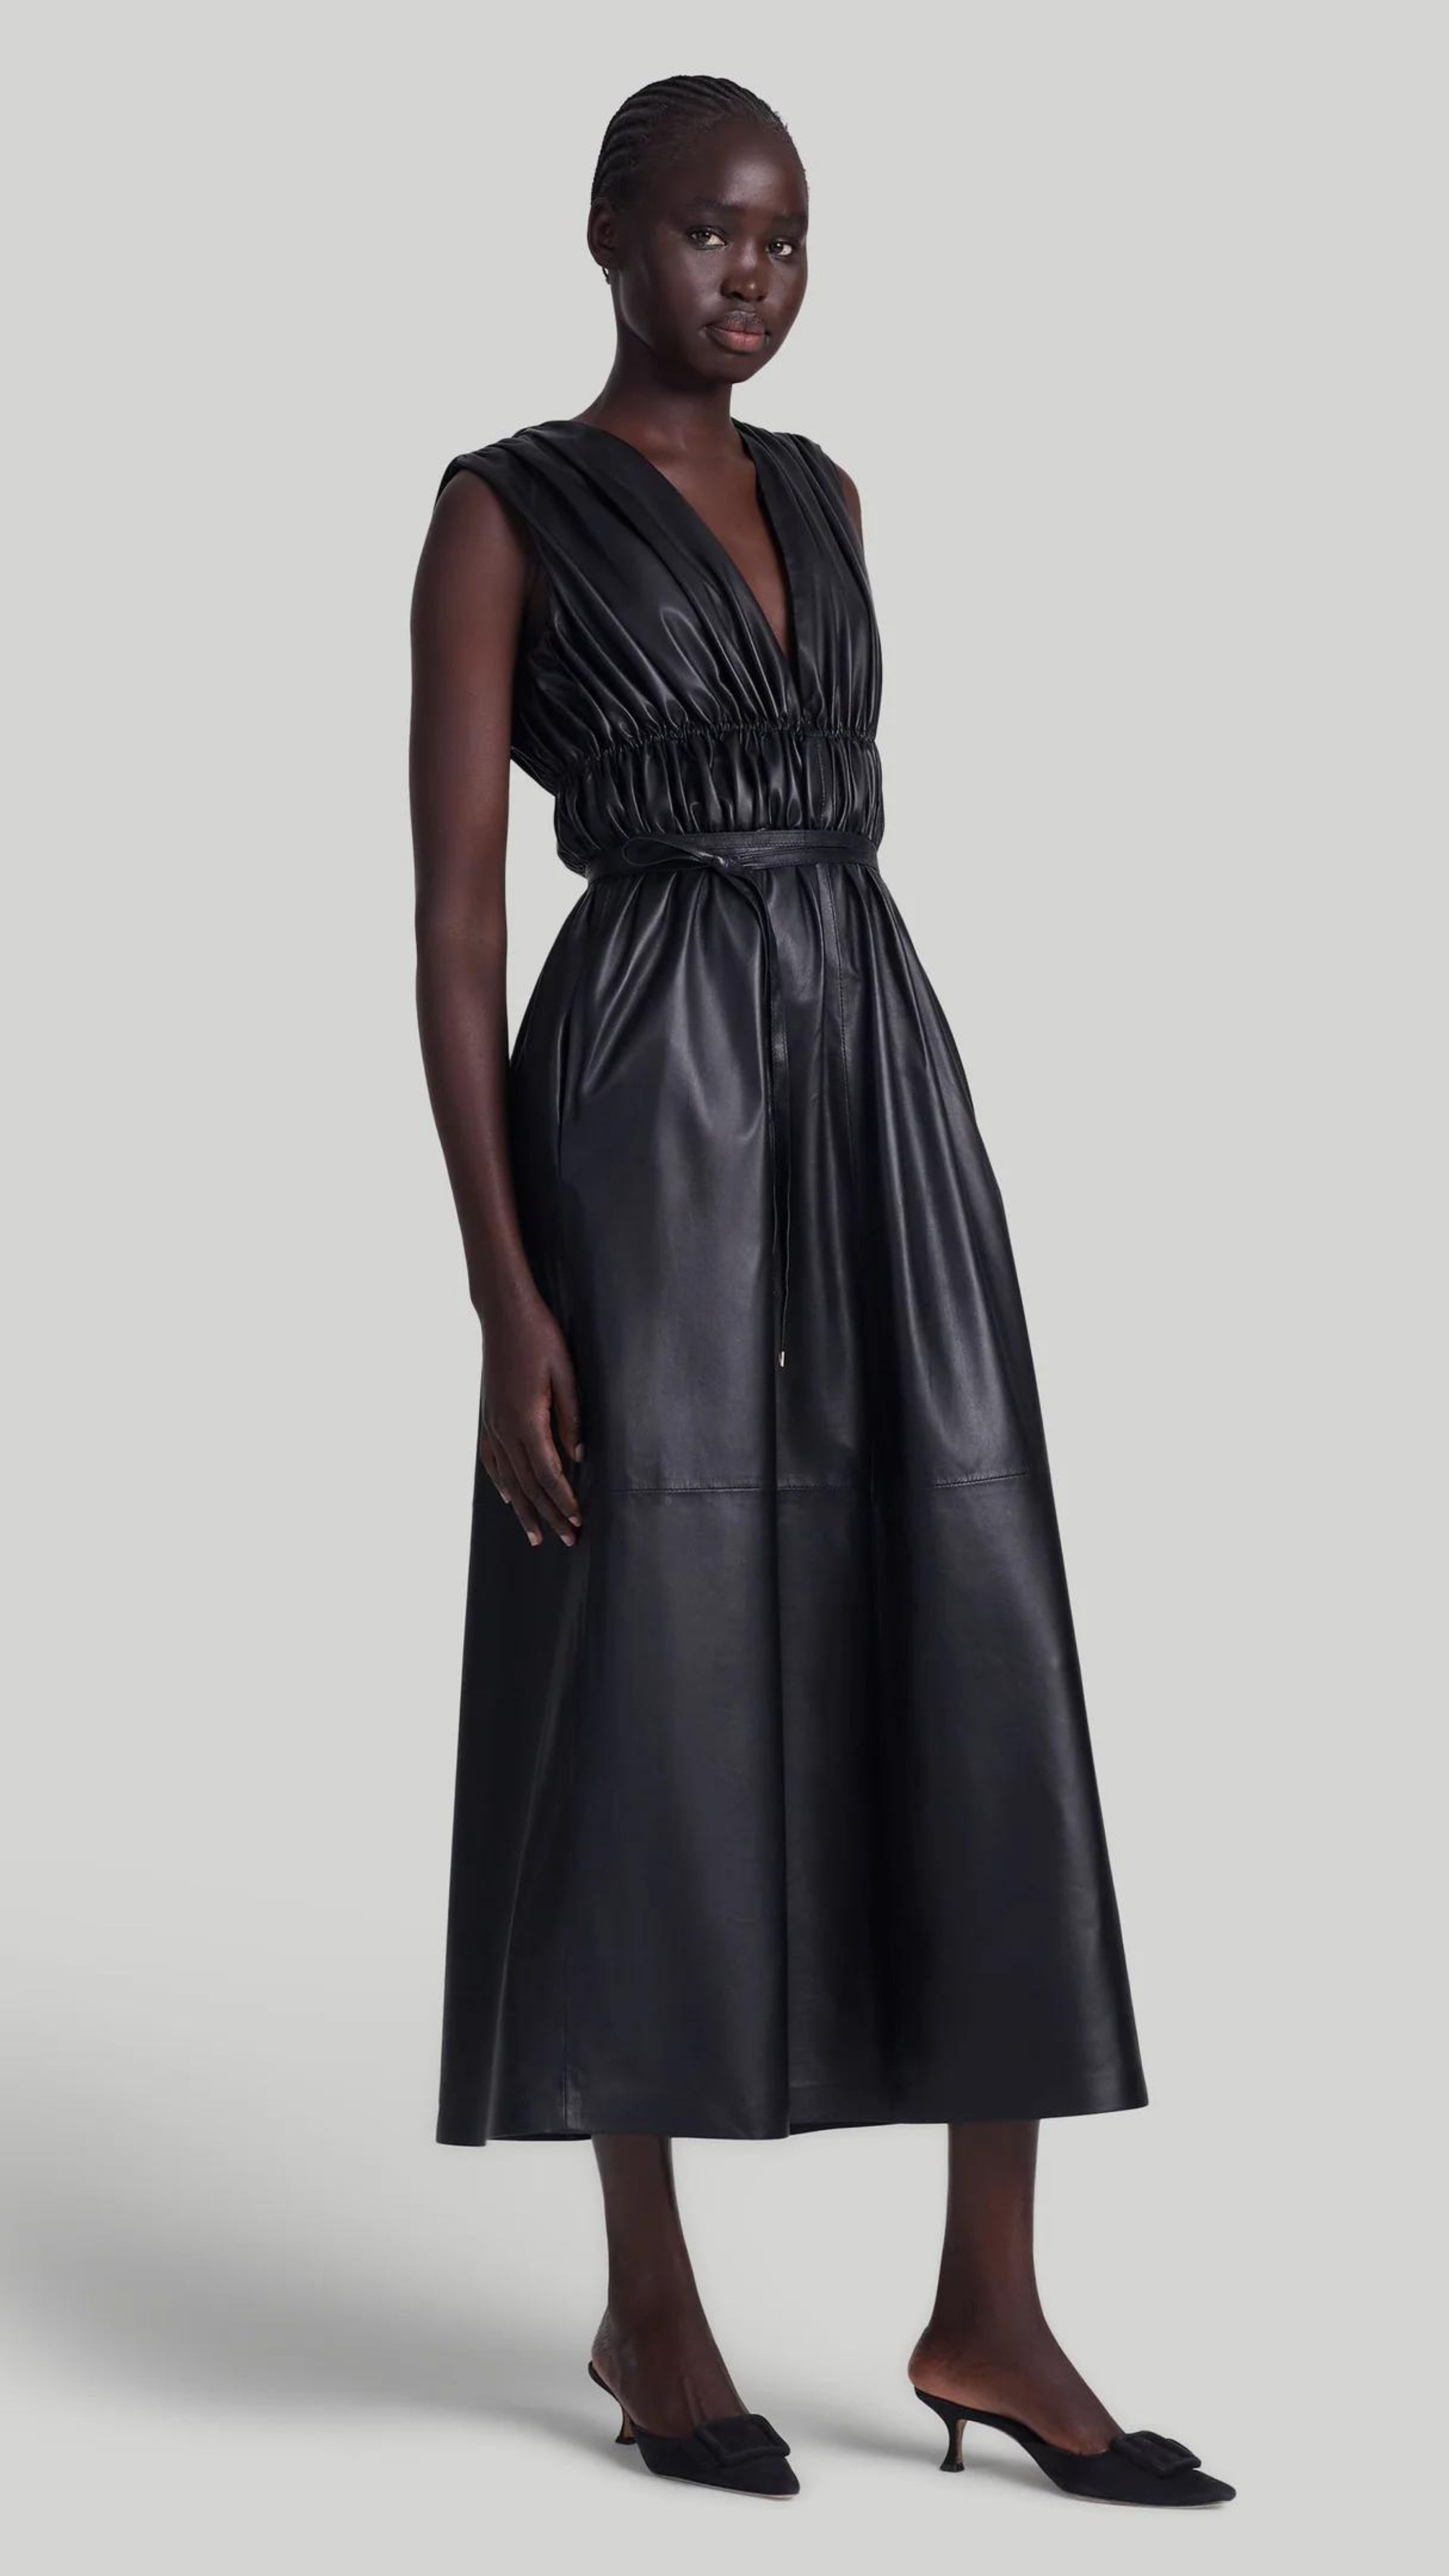 Altuzarra Fiona Dress, made from soft lamb leather. It features a maxi silhouette with a low V-neck, sleeveless, and ruching that folds at the waist with a thin leather belt. Shown on model facing front and to the side.